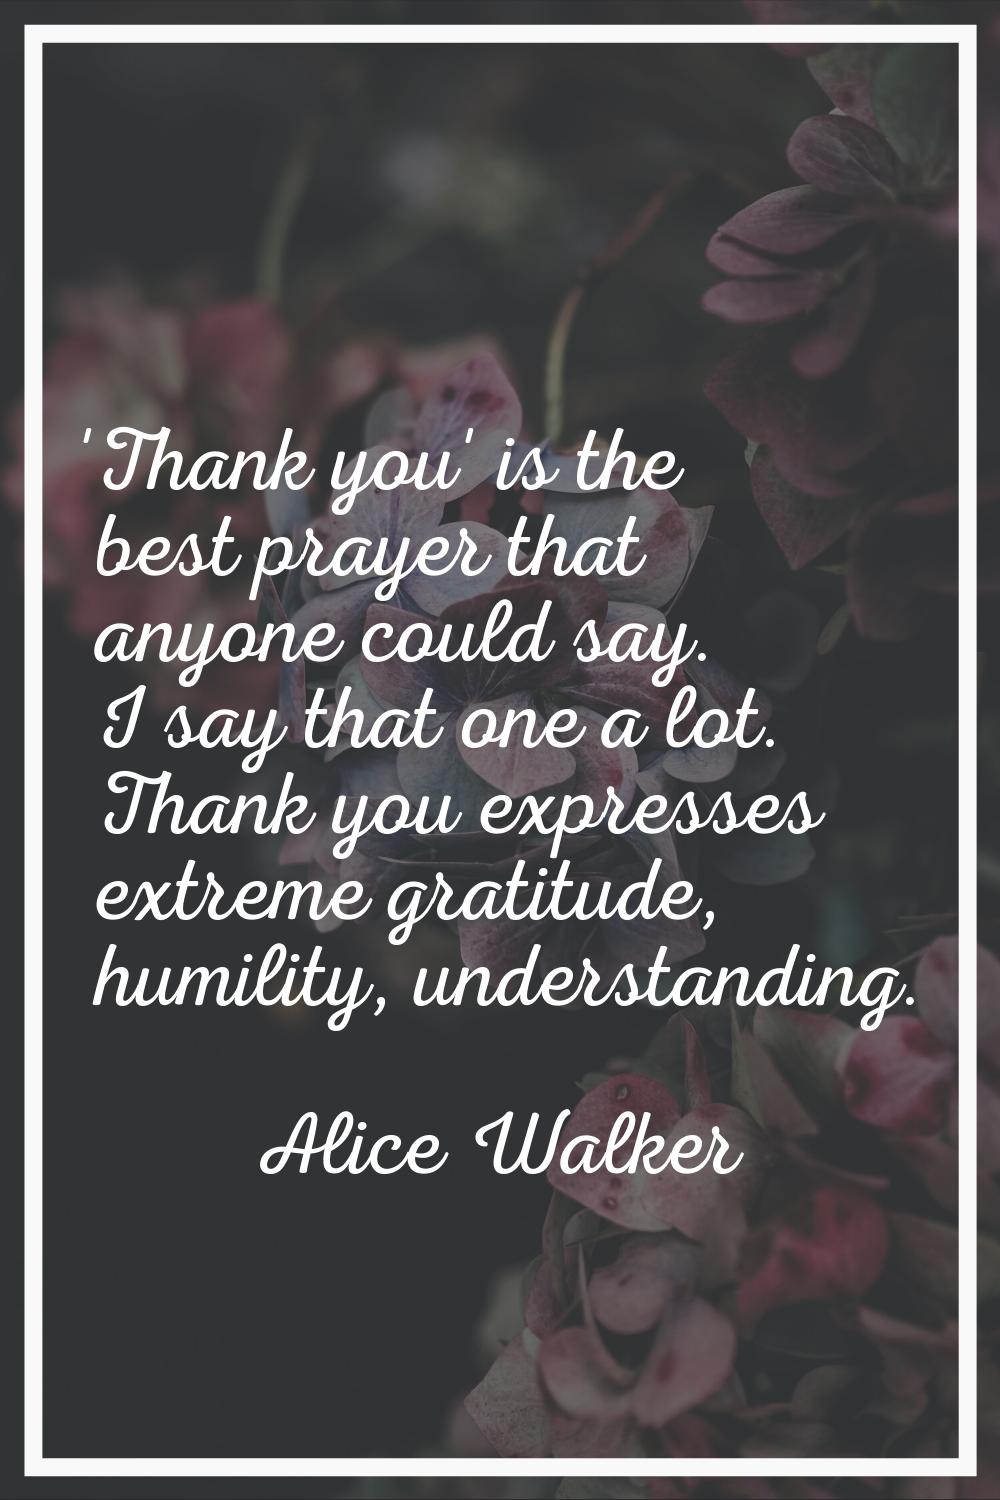 'Thank you' is the best prayer that anyone could say. I say that one a lot. Thank you expresses ext